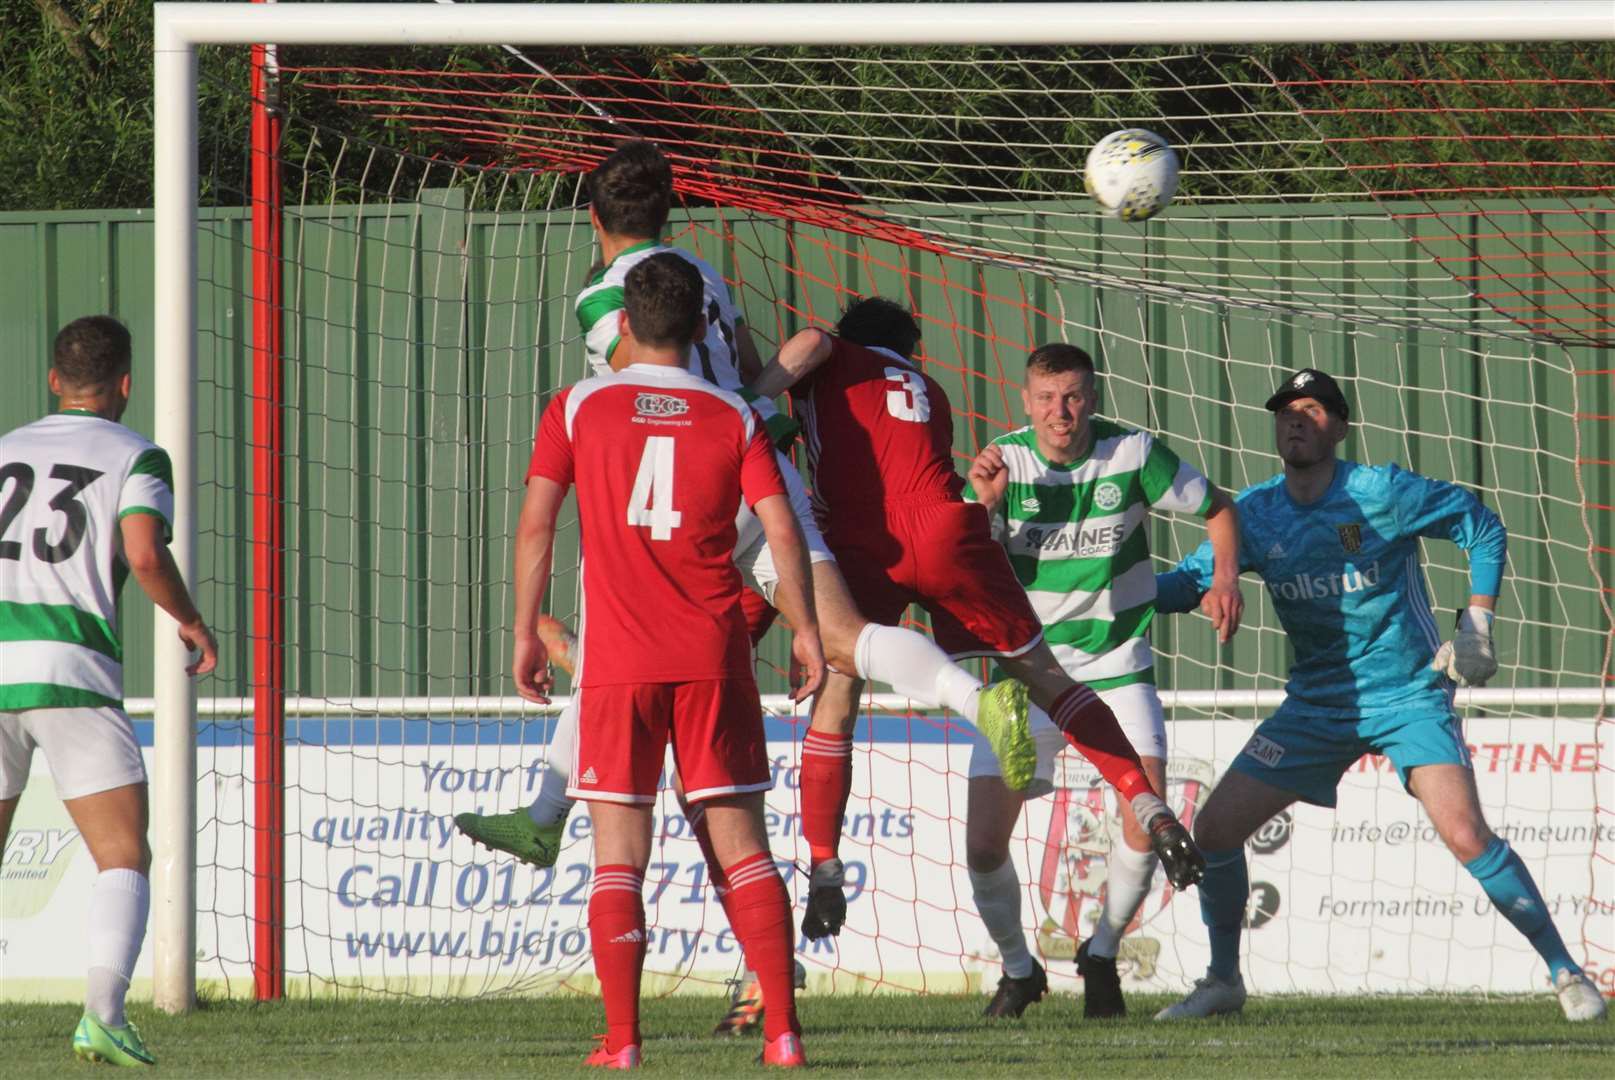 Formartine's defence and goalkeeper Ewen Macdonald stood strong against Buckie. Picture: Kyle Ritchie